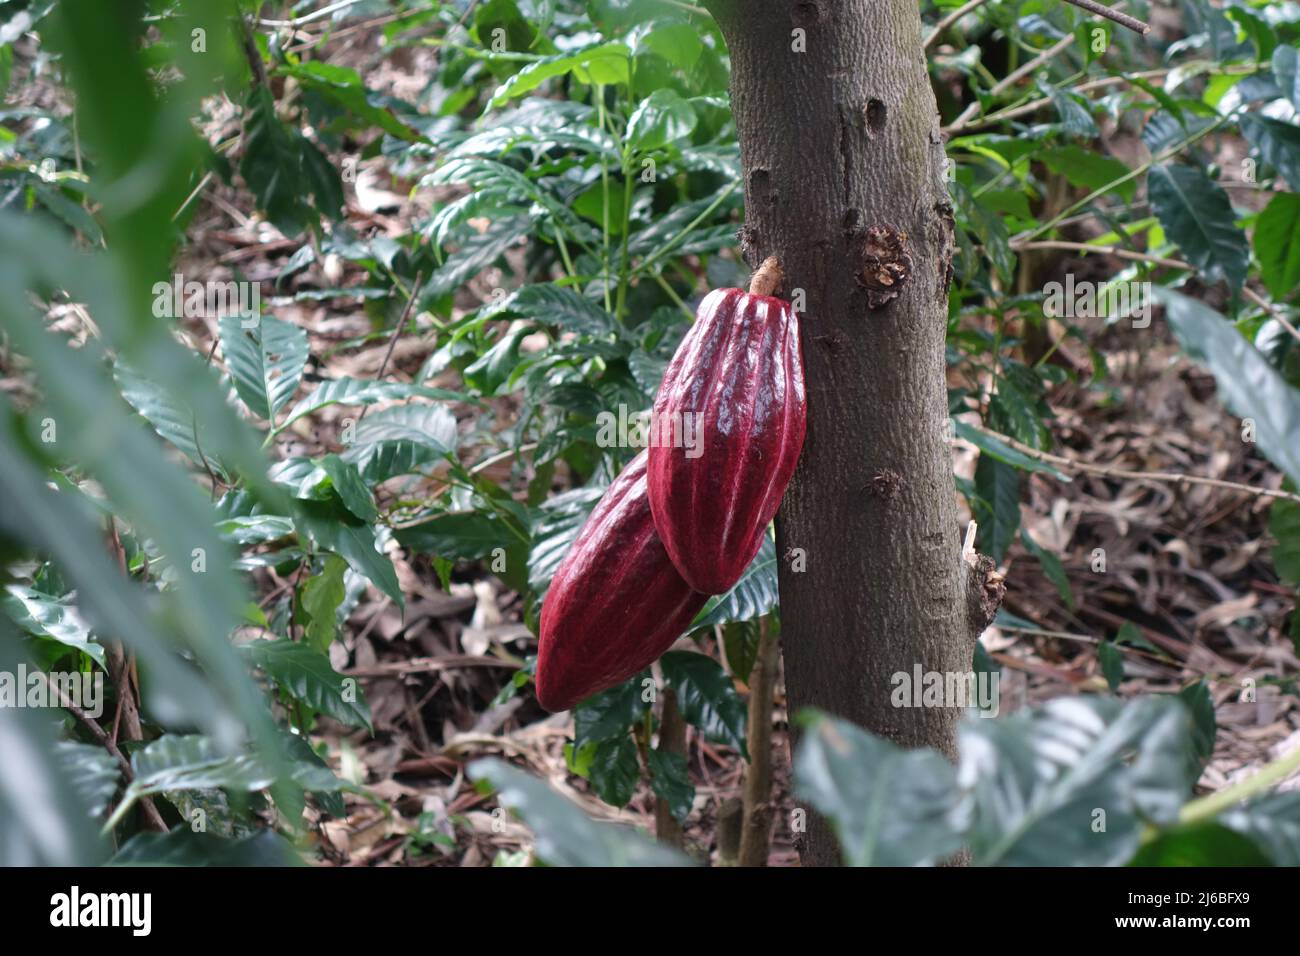 Two red cocoa beans on the tree Stock Photo